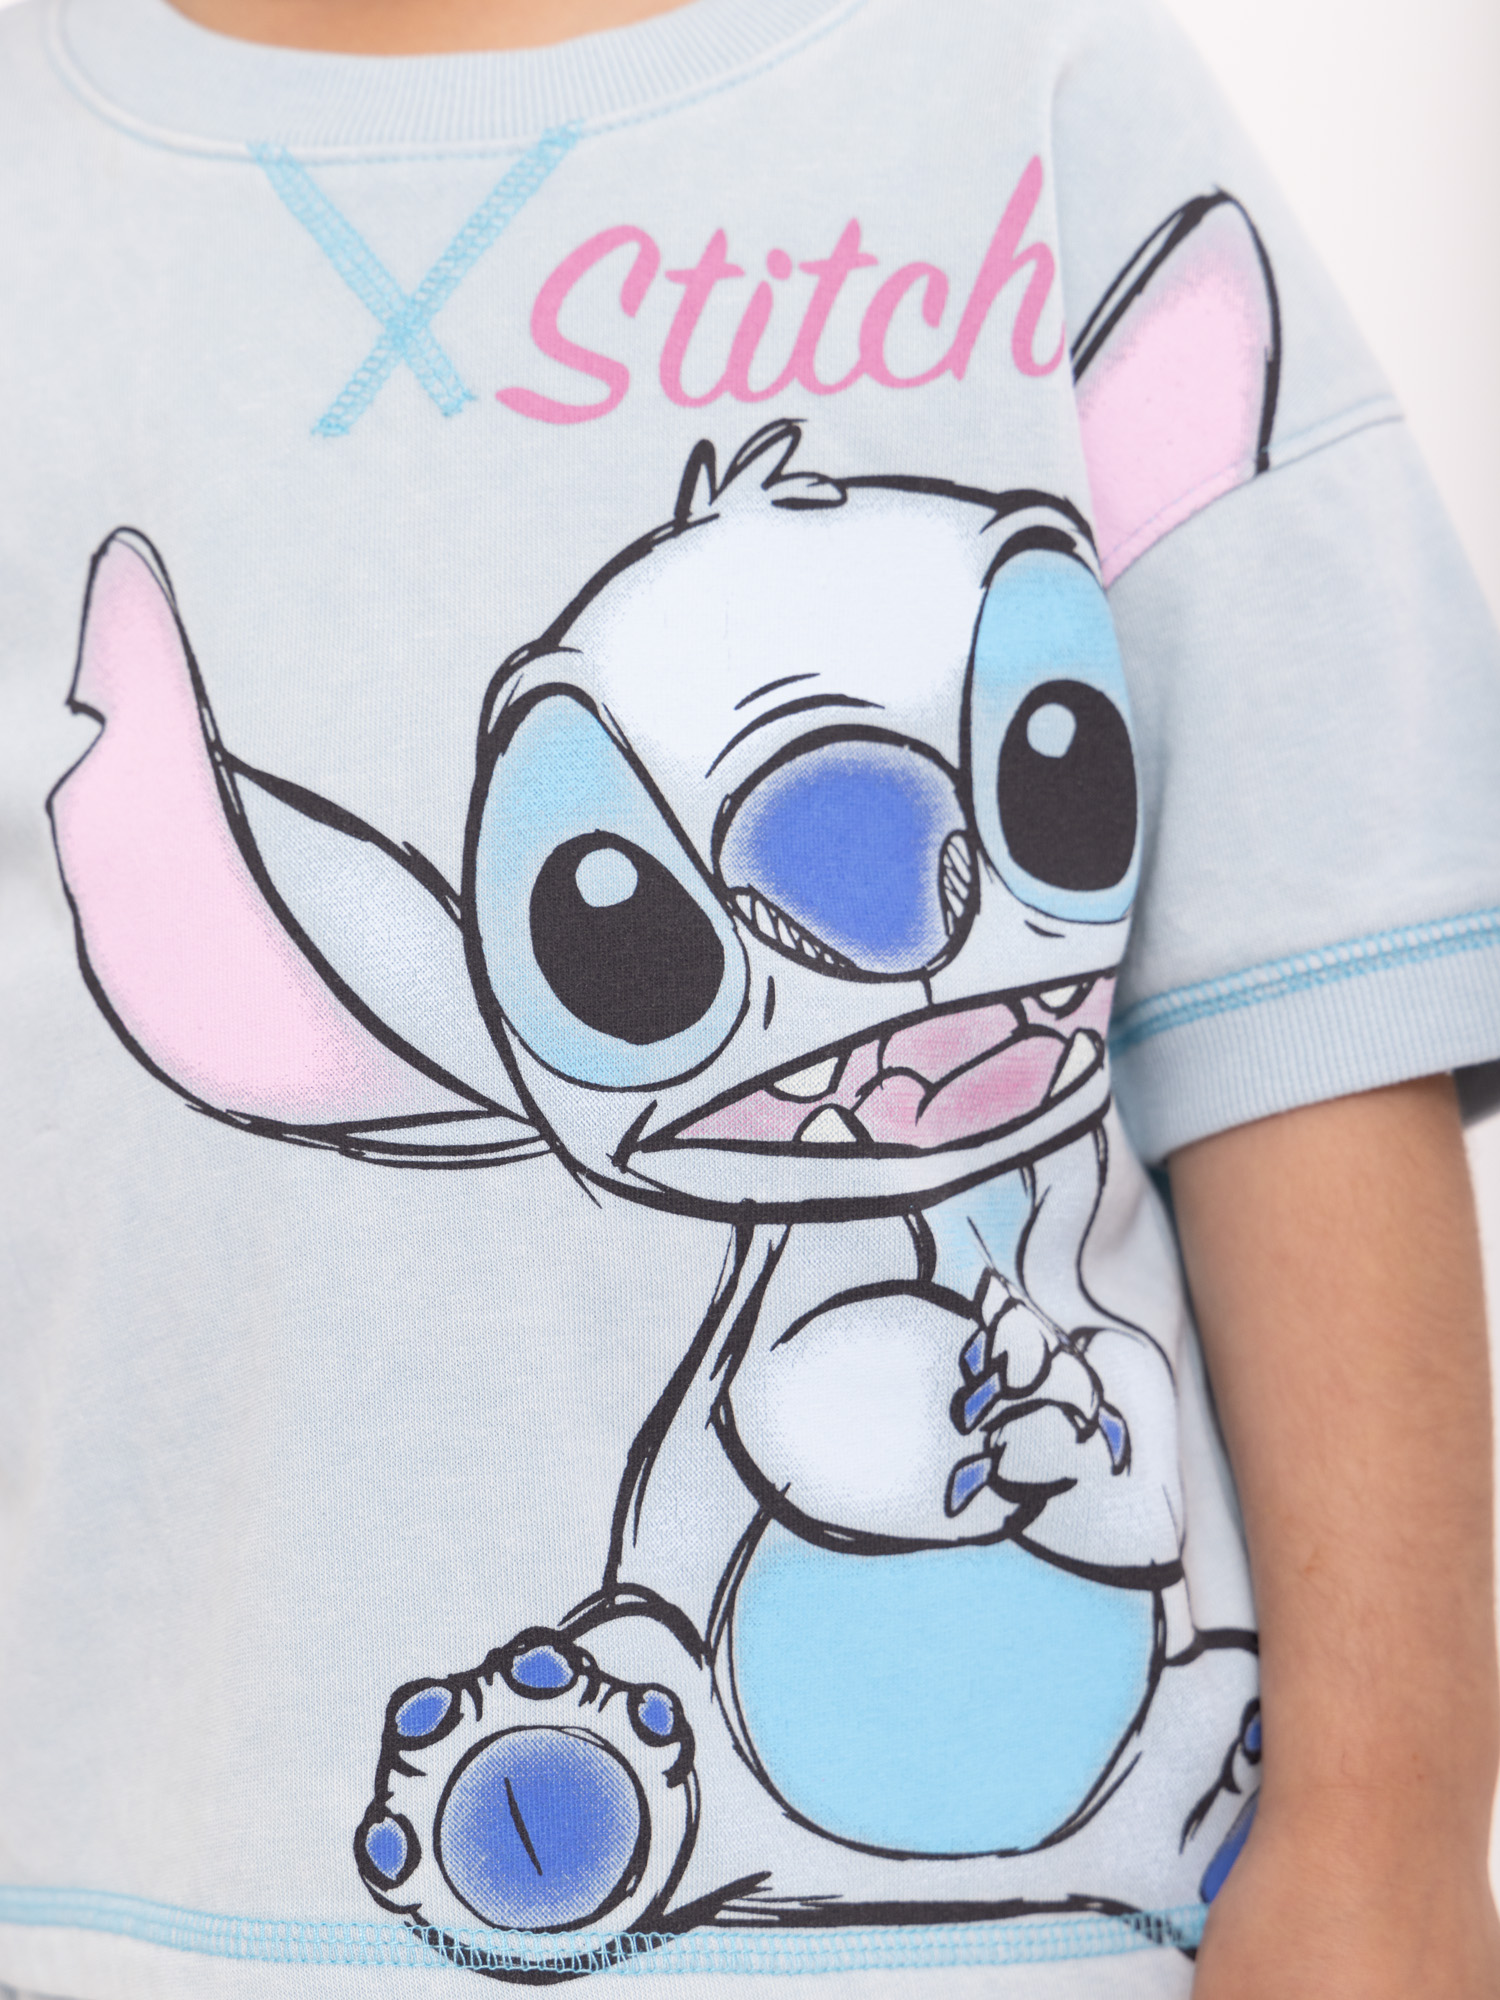 Lilo & Stitch Toddler Girls Tee and Shorts Set, 2-Piece, Sizes 12M-5T - image 5 of 10